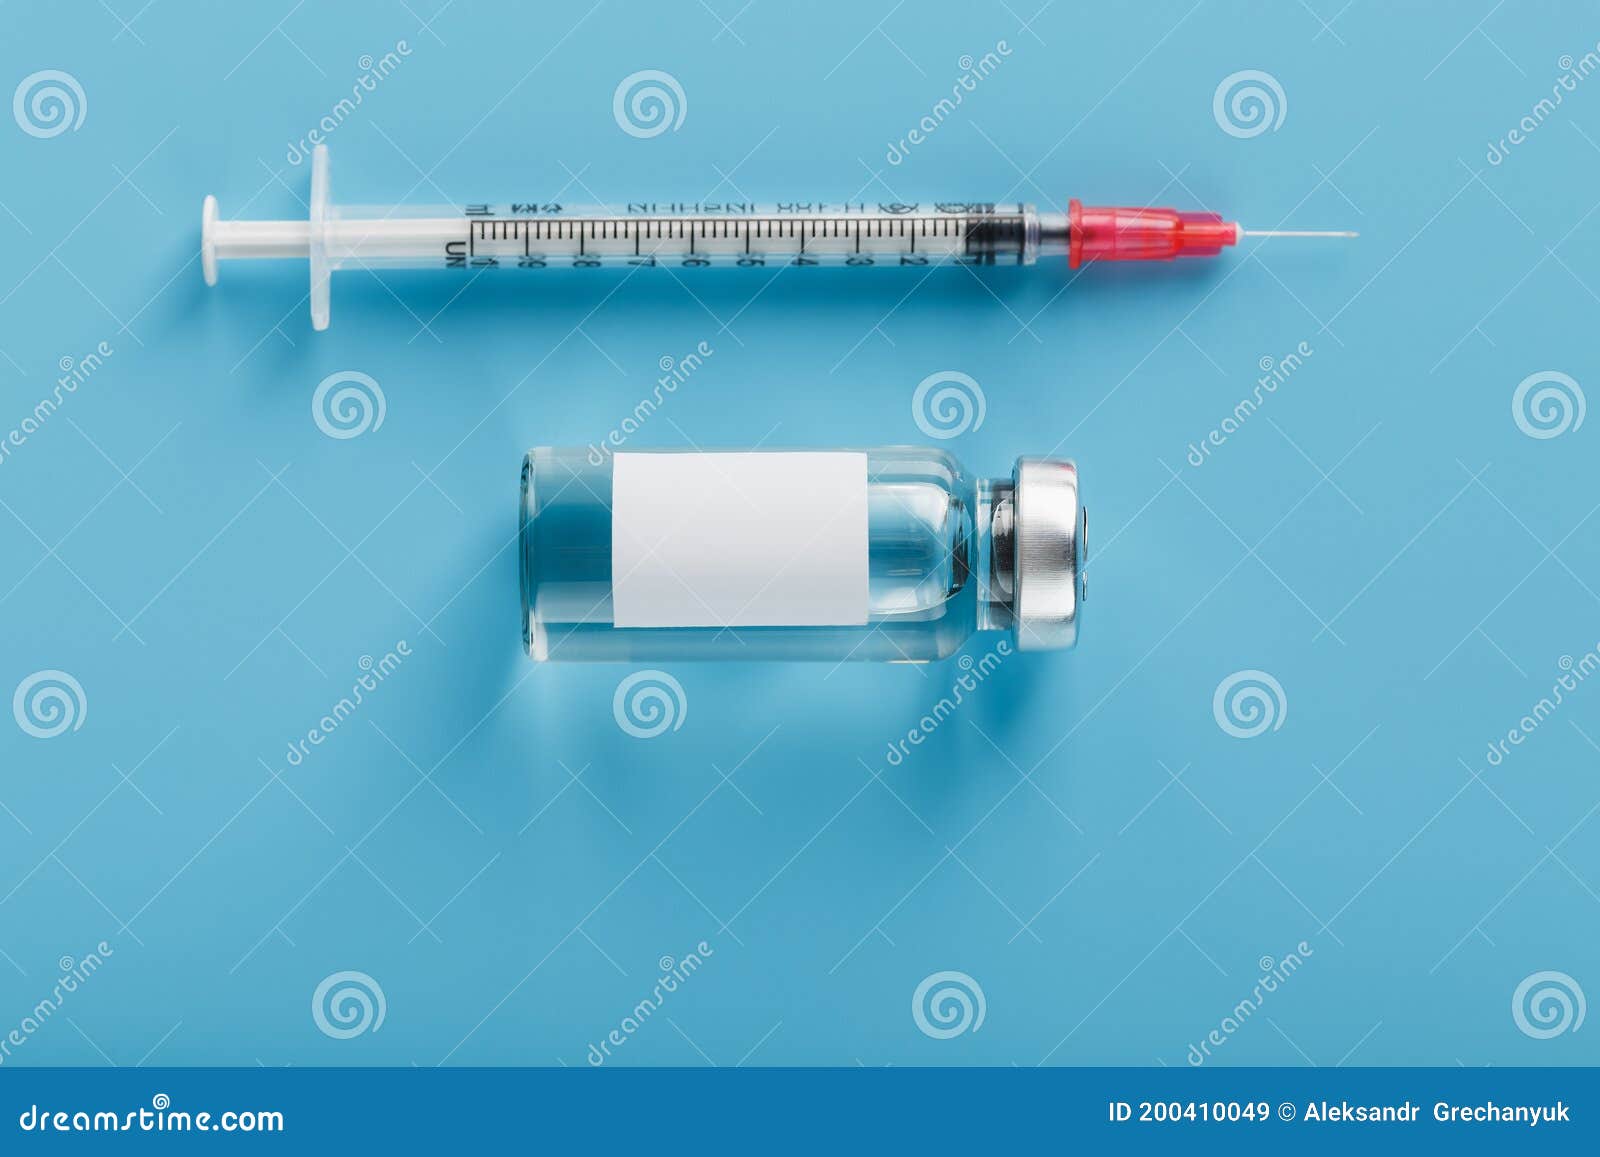 ampoule with a vaccine and a syringe for viruses and diseases on a blue background